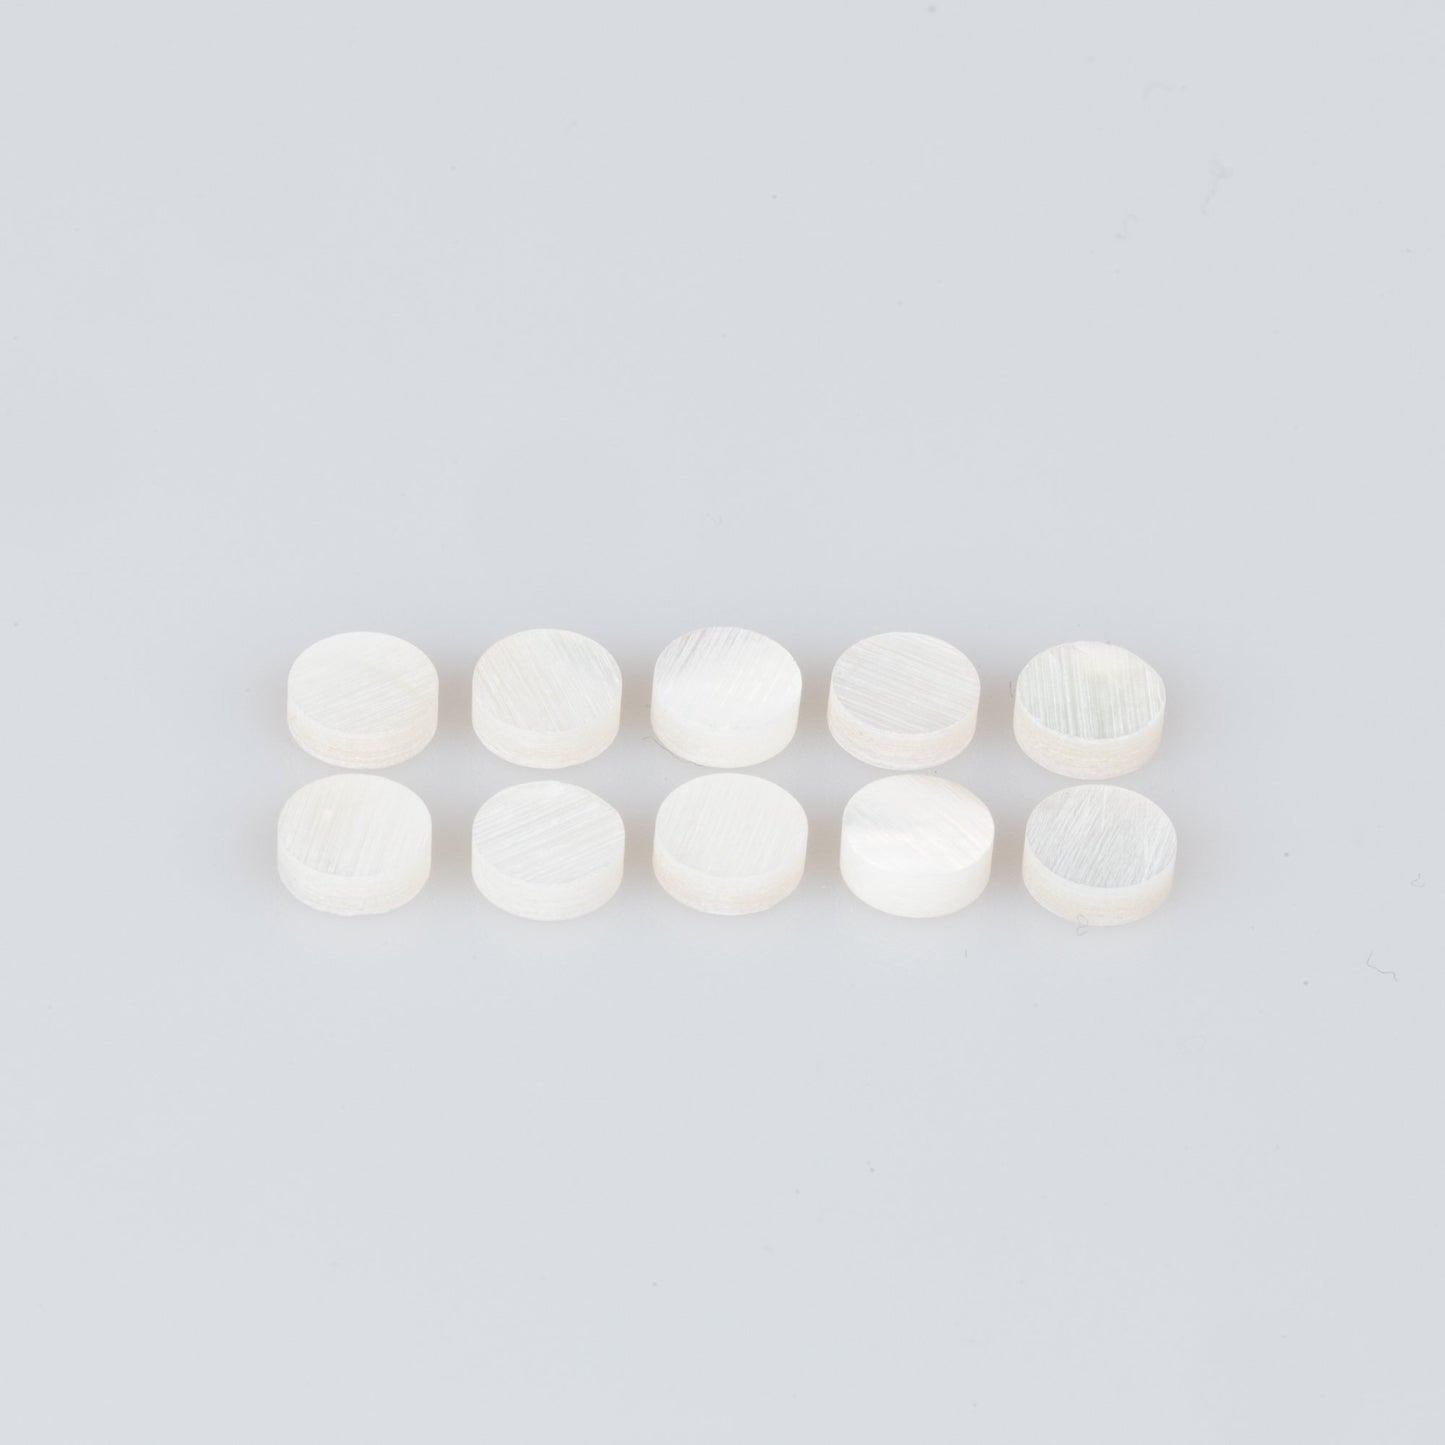 Mother of Pearl - Dot Inlays (Set of 10)